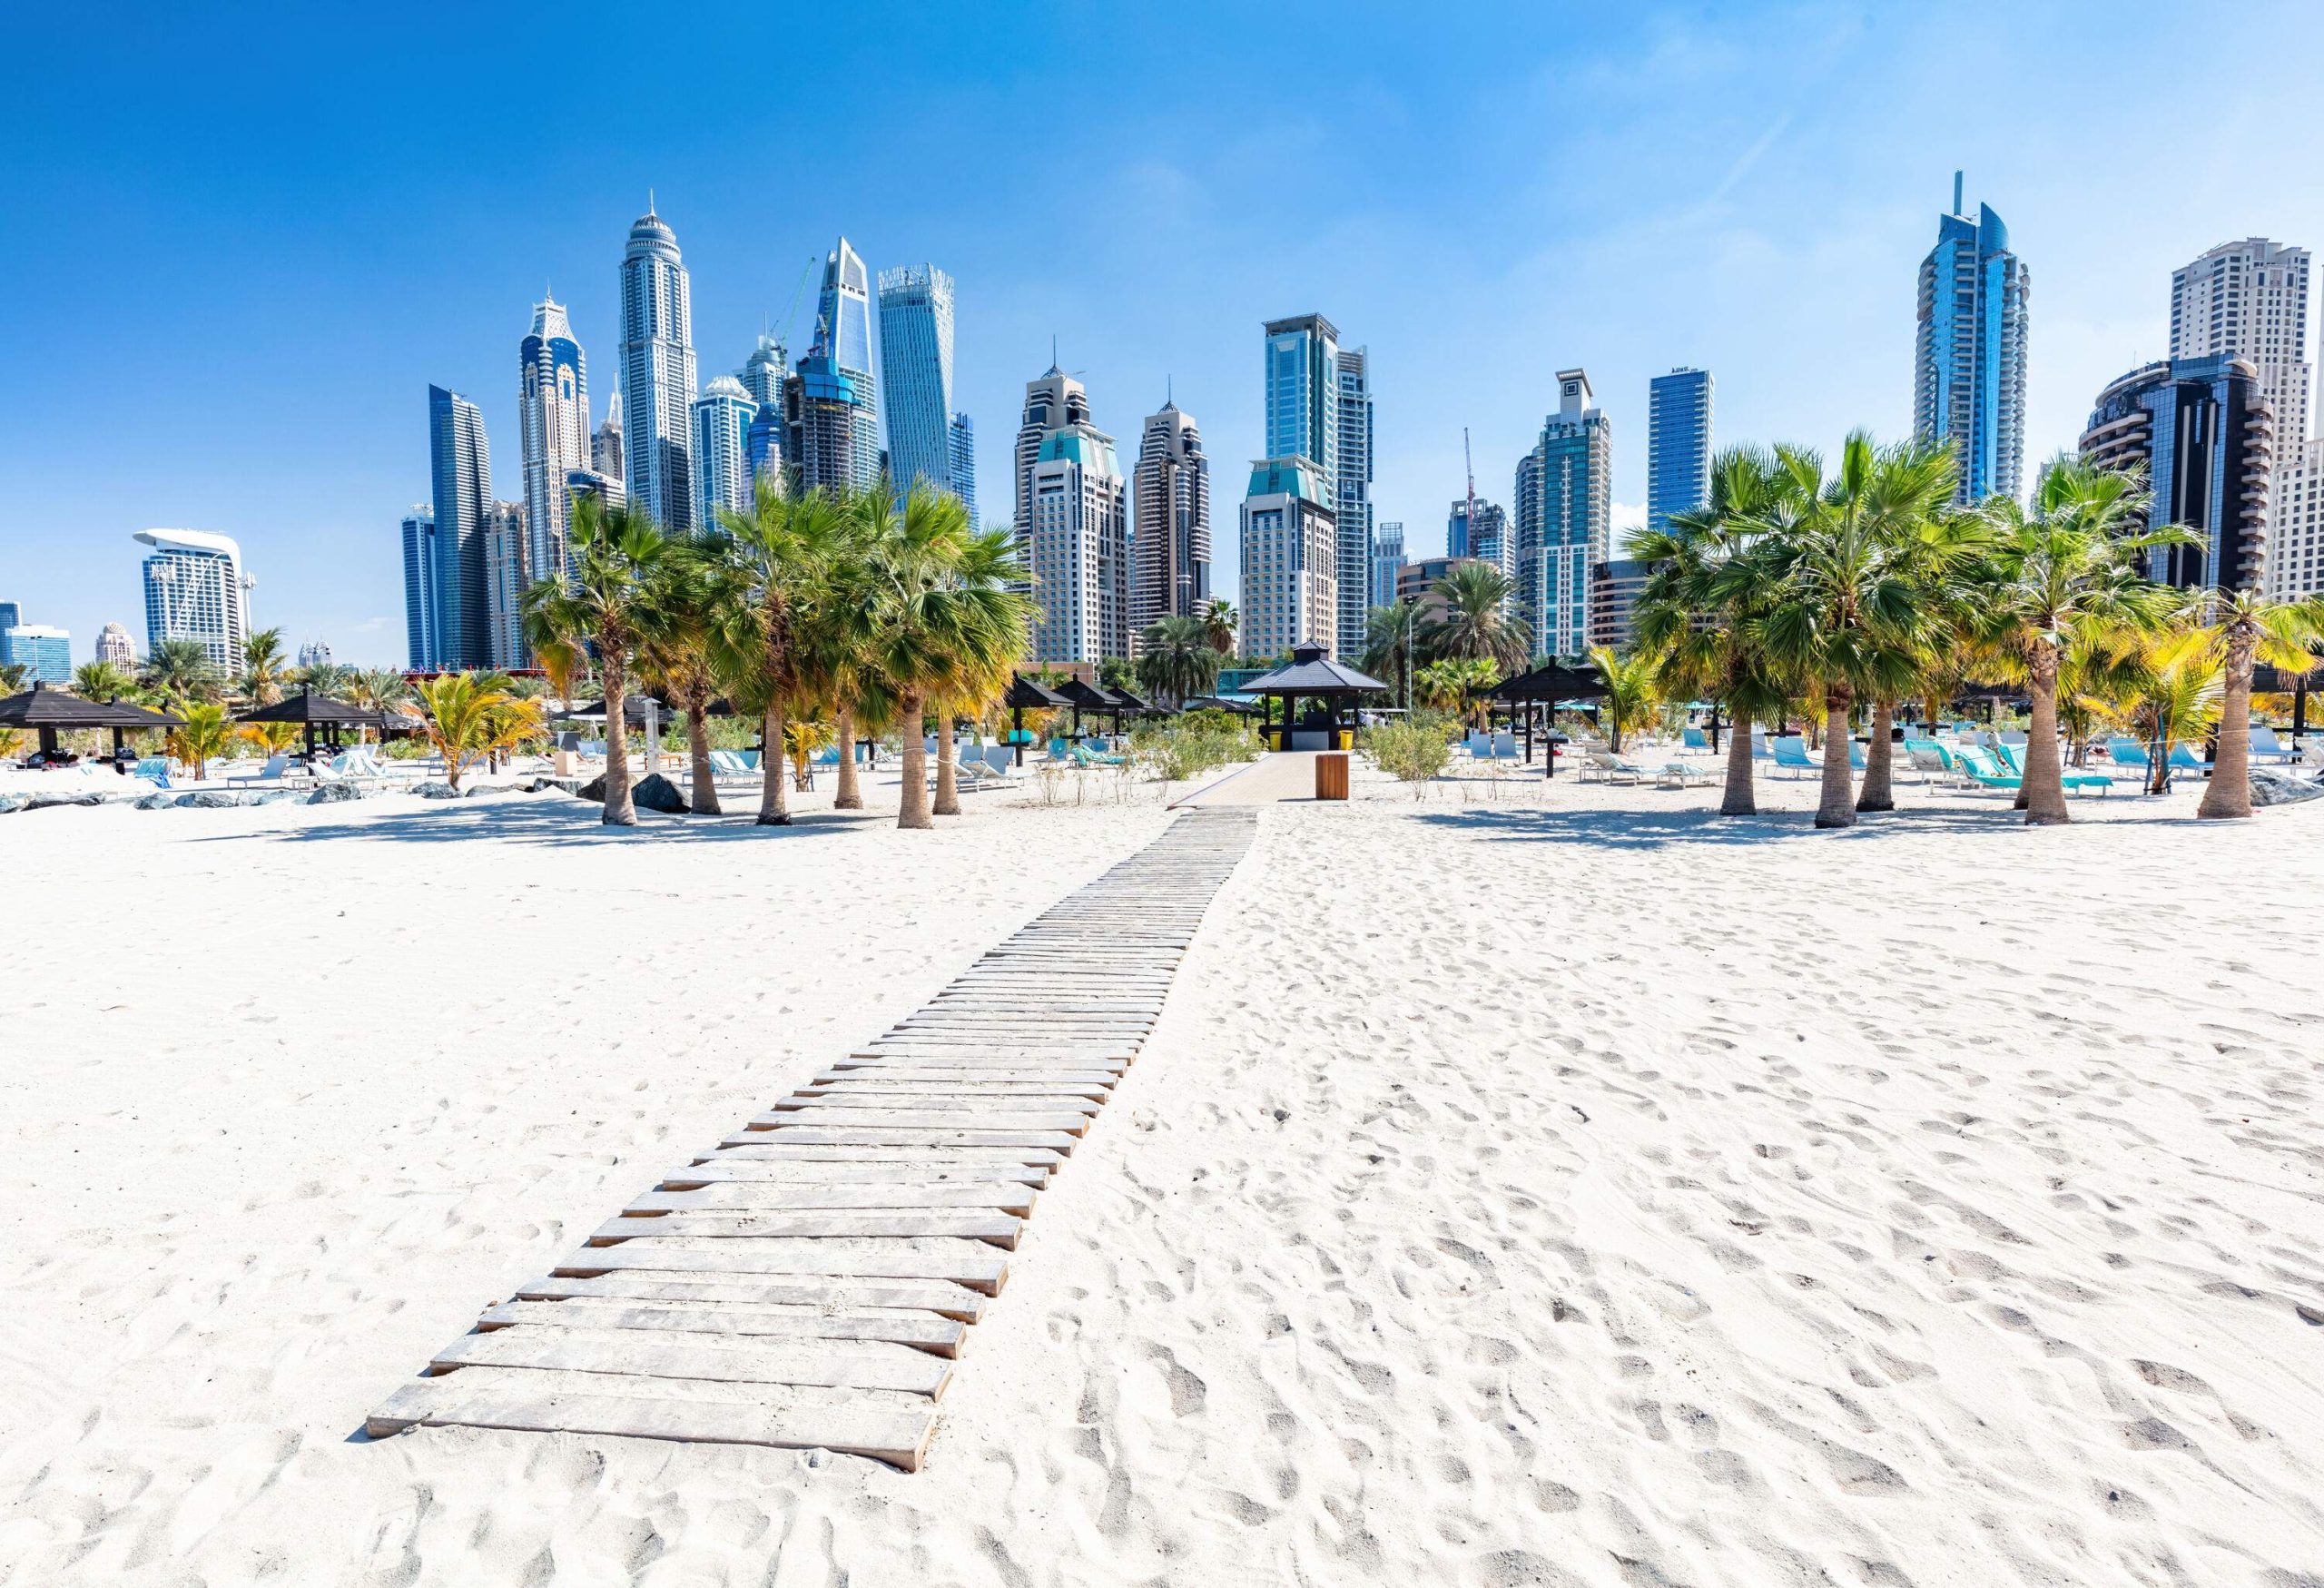 A wooden boardwalk runs through a sandy beach with palm trees and a backdrop of skyscrapers.